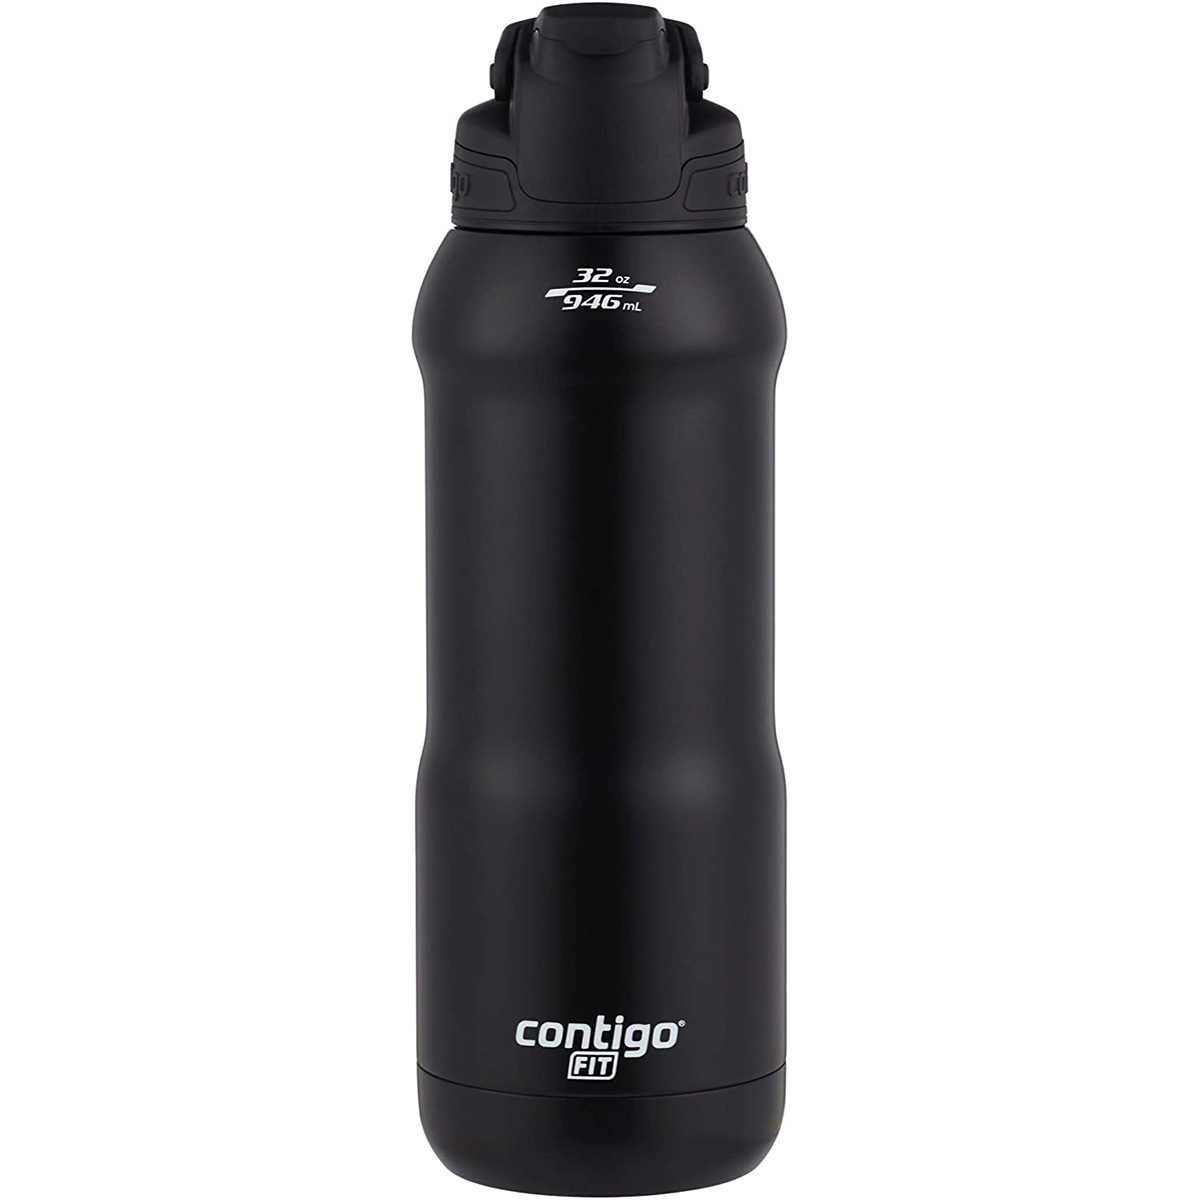  Contigo Cortland Spill-Proof Water Bottle, BPA-Free Plastic  Water Bottle with Leak-Proof Lid and Carry Handle, Dishwasher Safe,  Licorice, 24oz : Sports & Outdoors